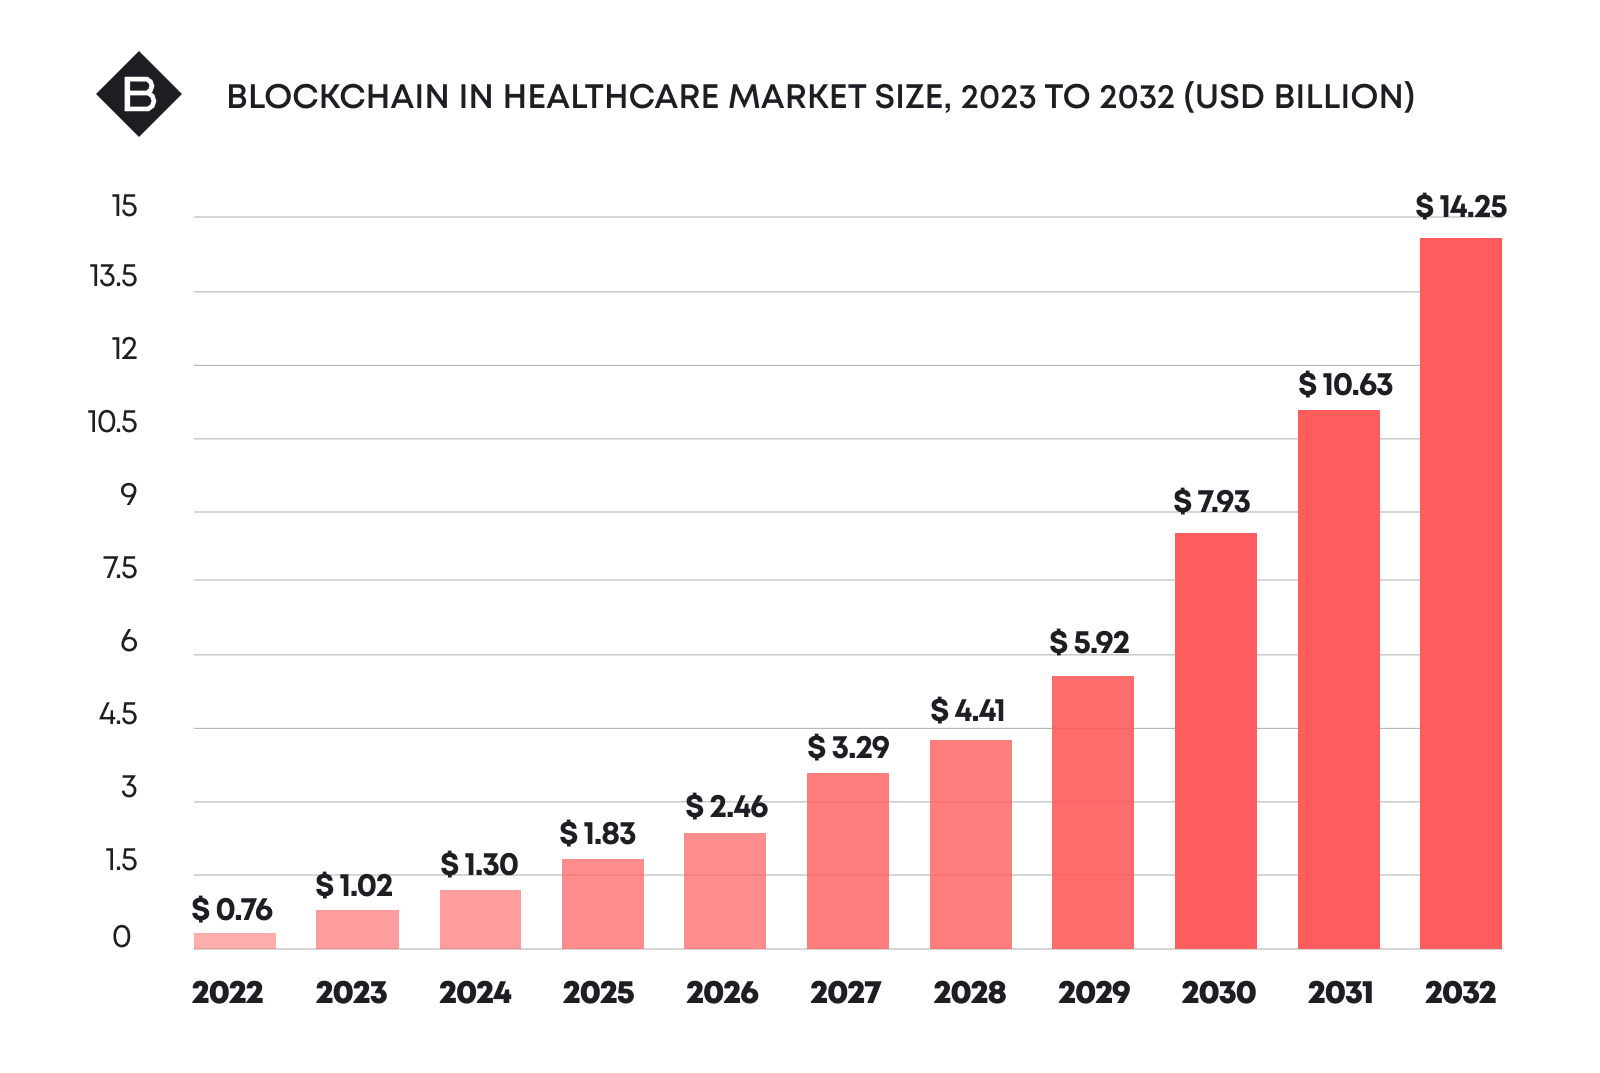 As per recent studies, the global blockchain in the healthcare market is expected to reach $14.25 billion by 2032.